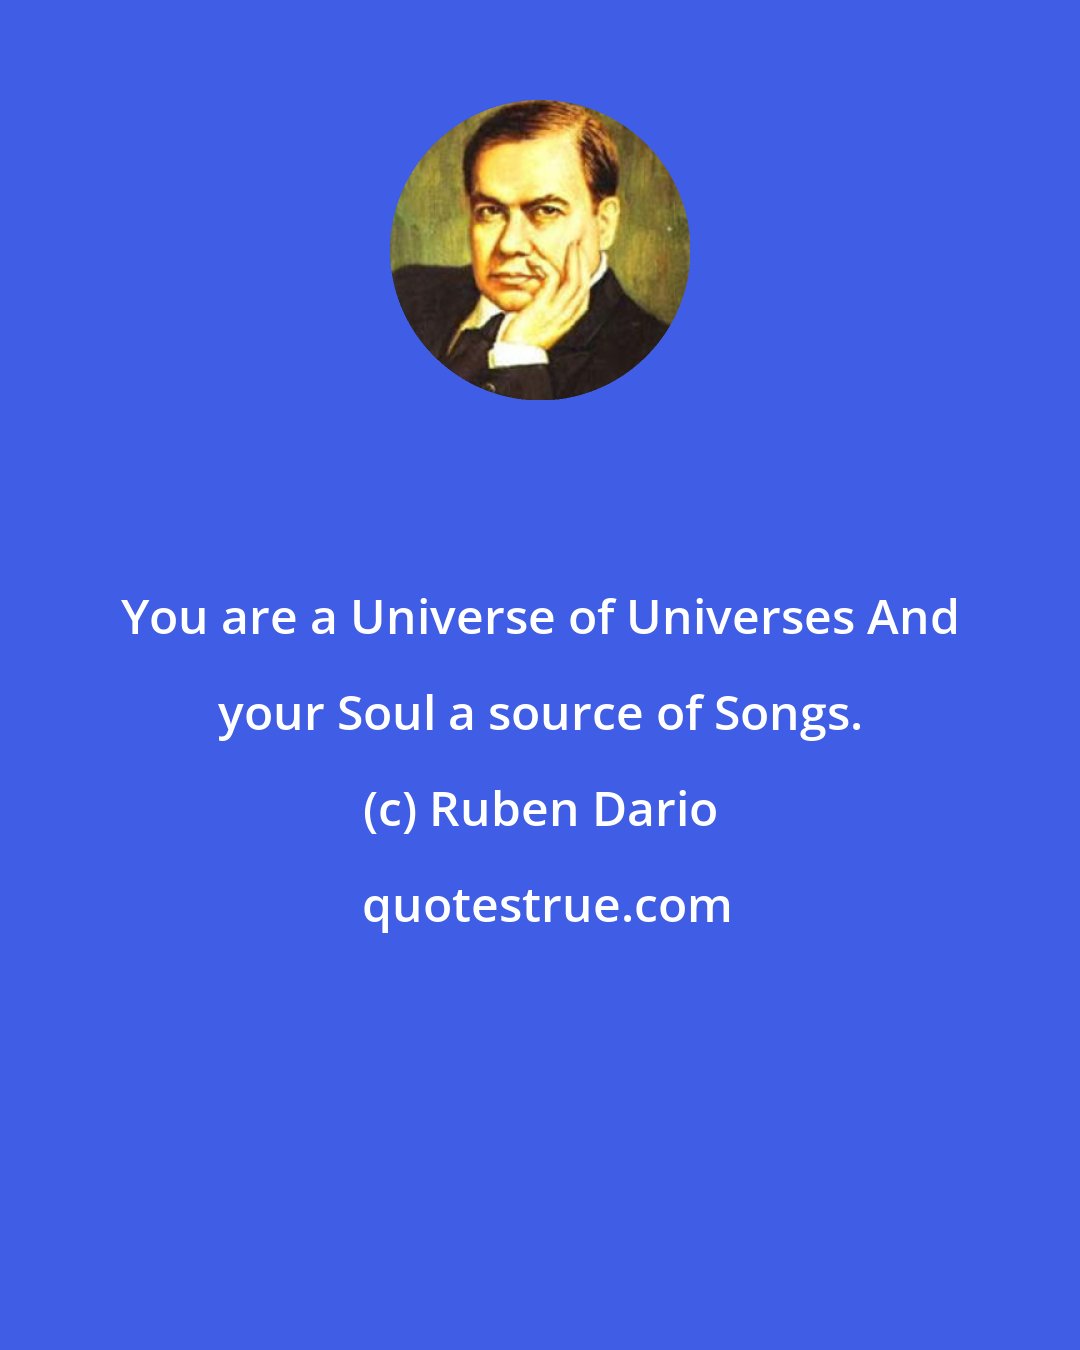 Ruben Dario: You are a Universe of Universes And your Soul a source of Songs.